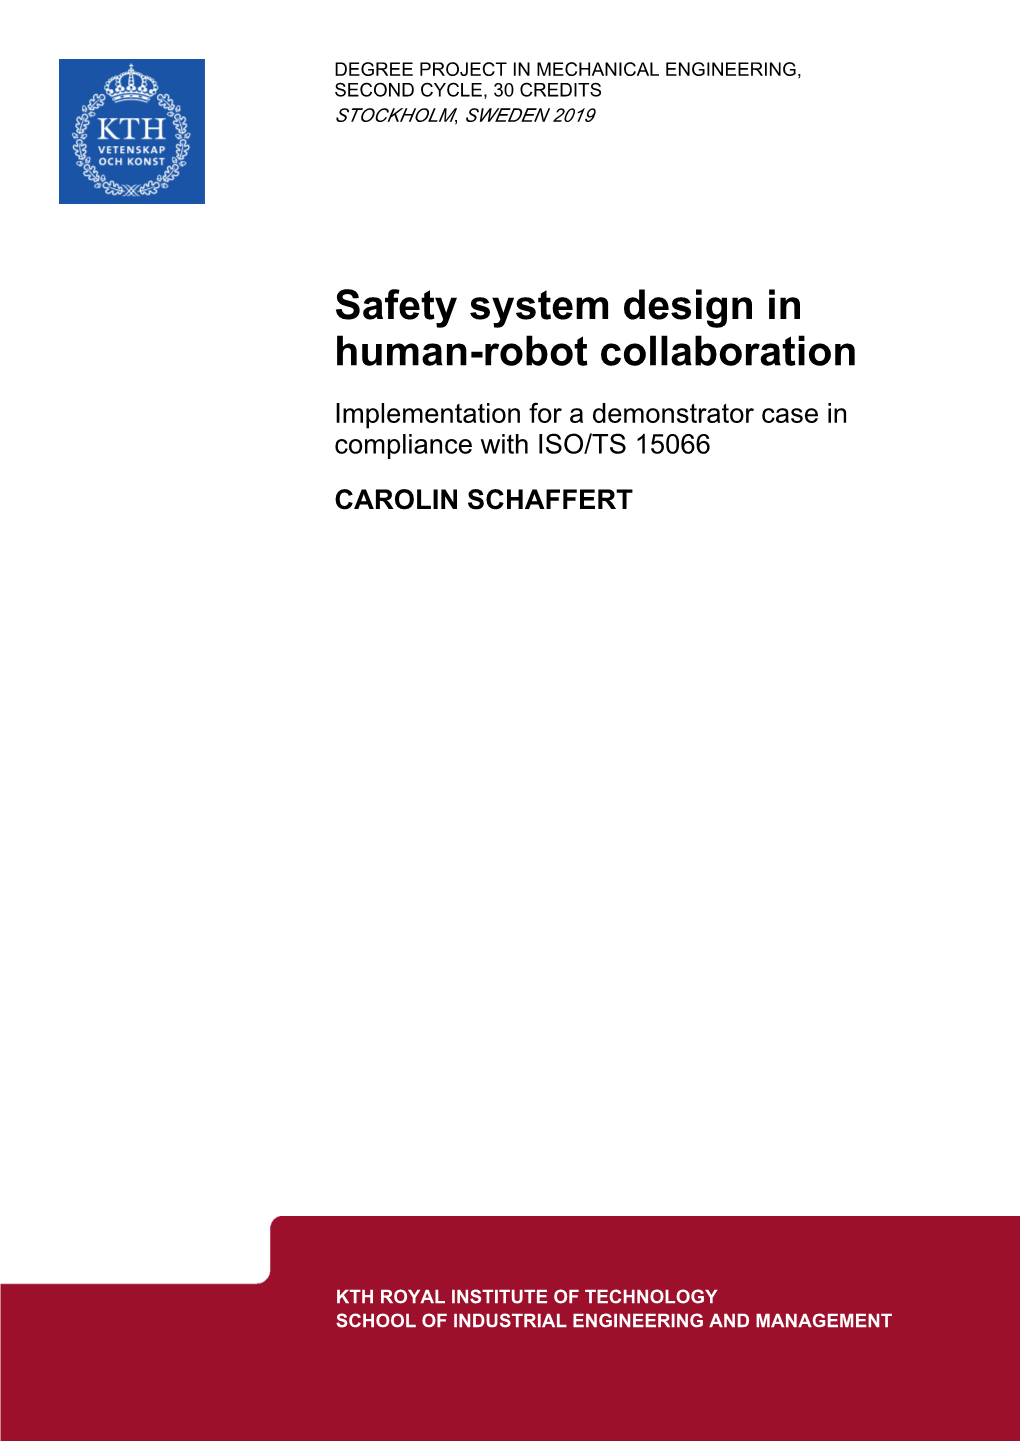 Safety System Design in Human-Robot Collaboration Implementation for a Demonstrator Case in Compliance with ISO/TS 15066